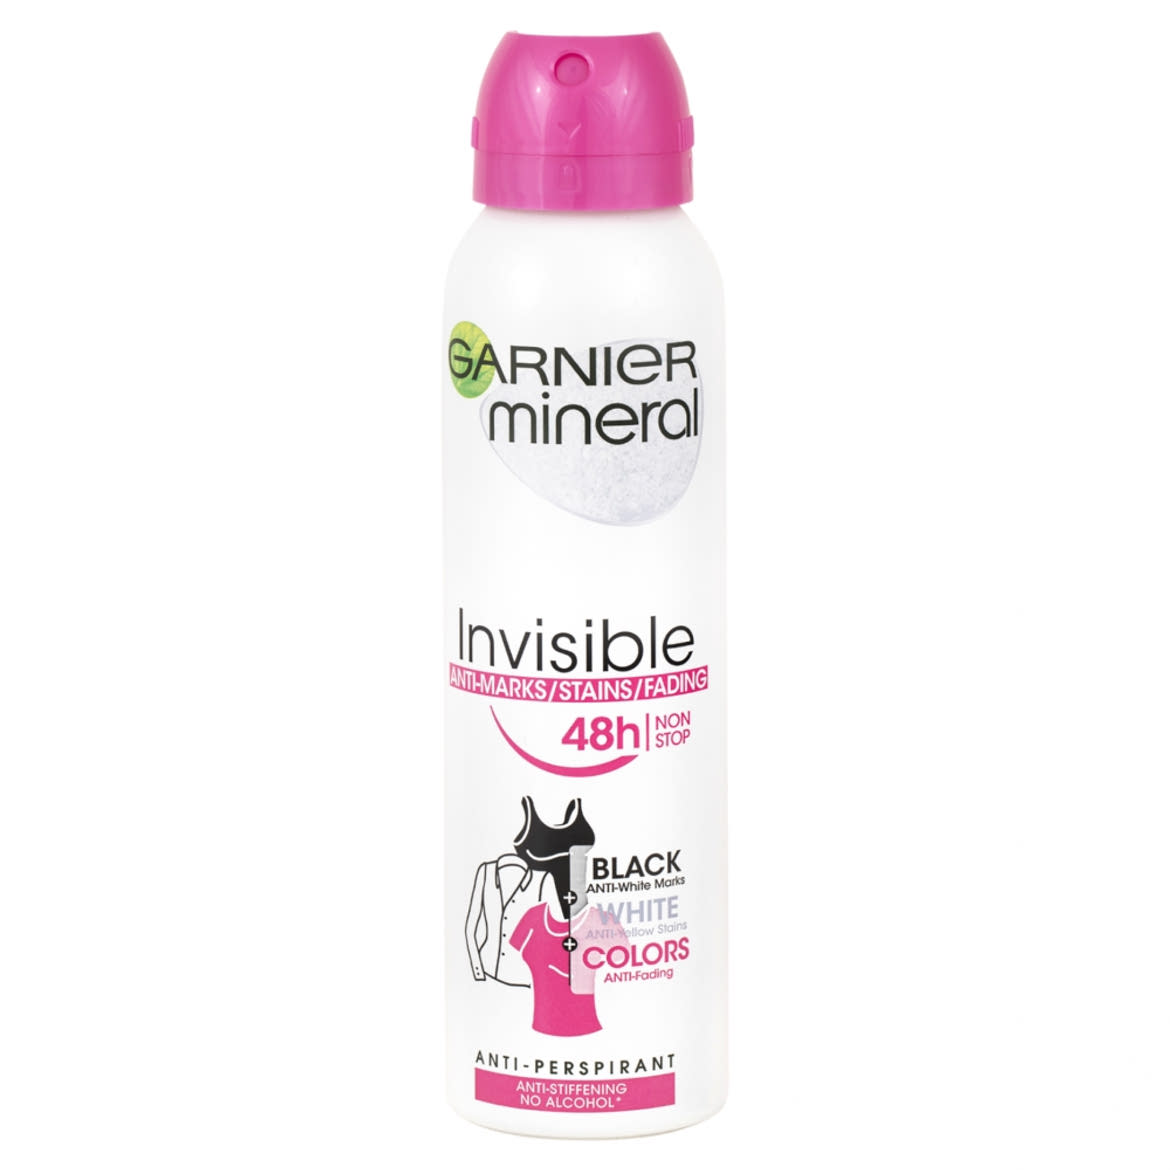 Garnier Mineral Quick Dry Invisible Black White Colors 48 h Floral Touch Spray